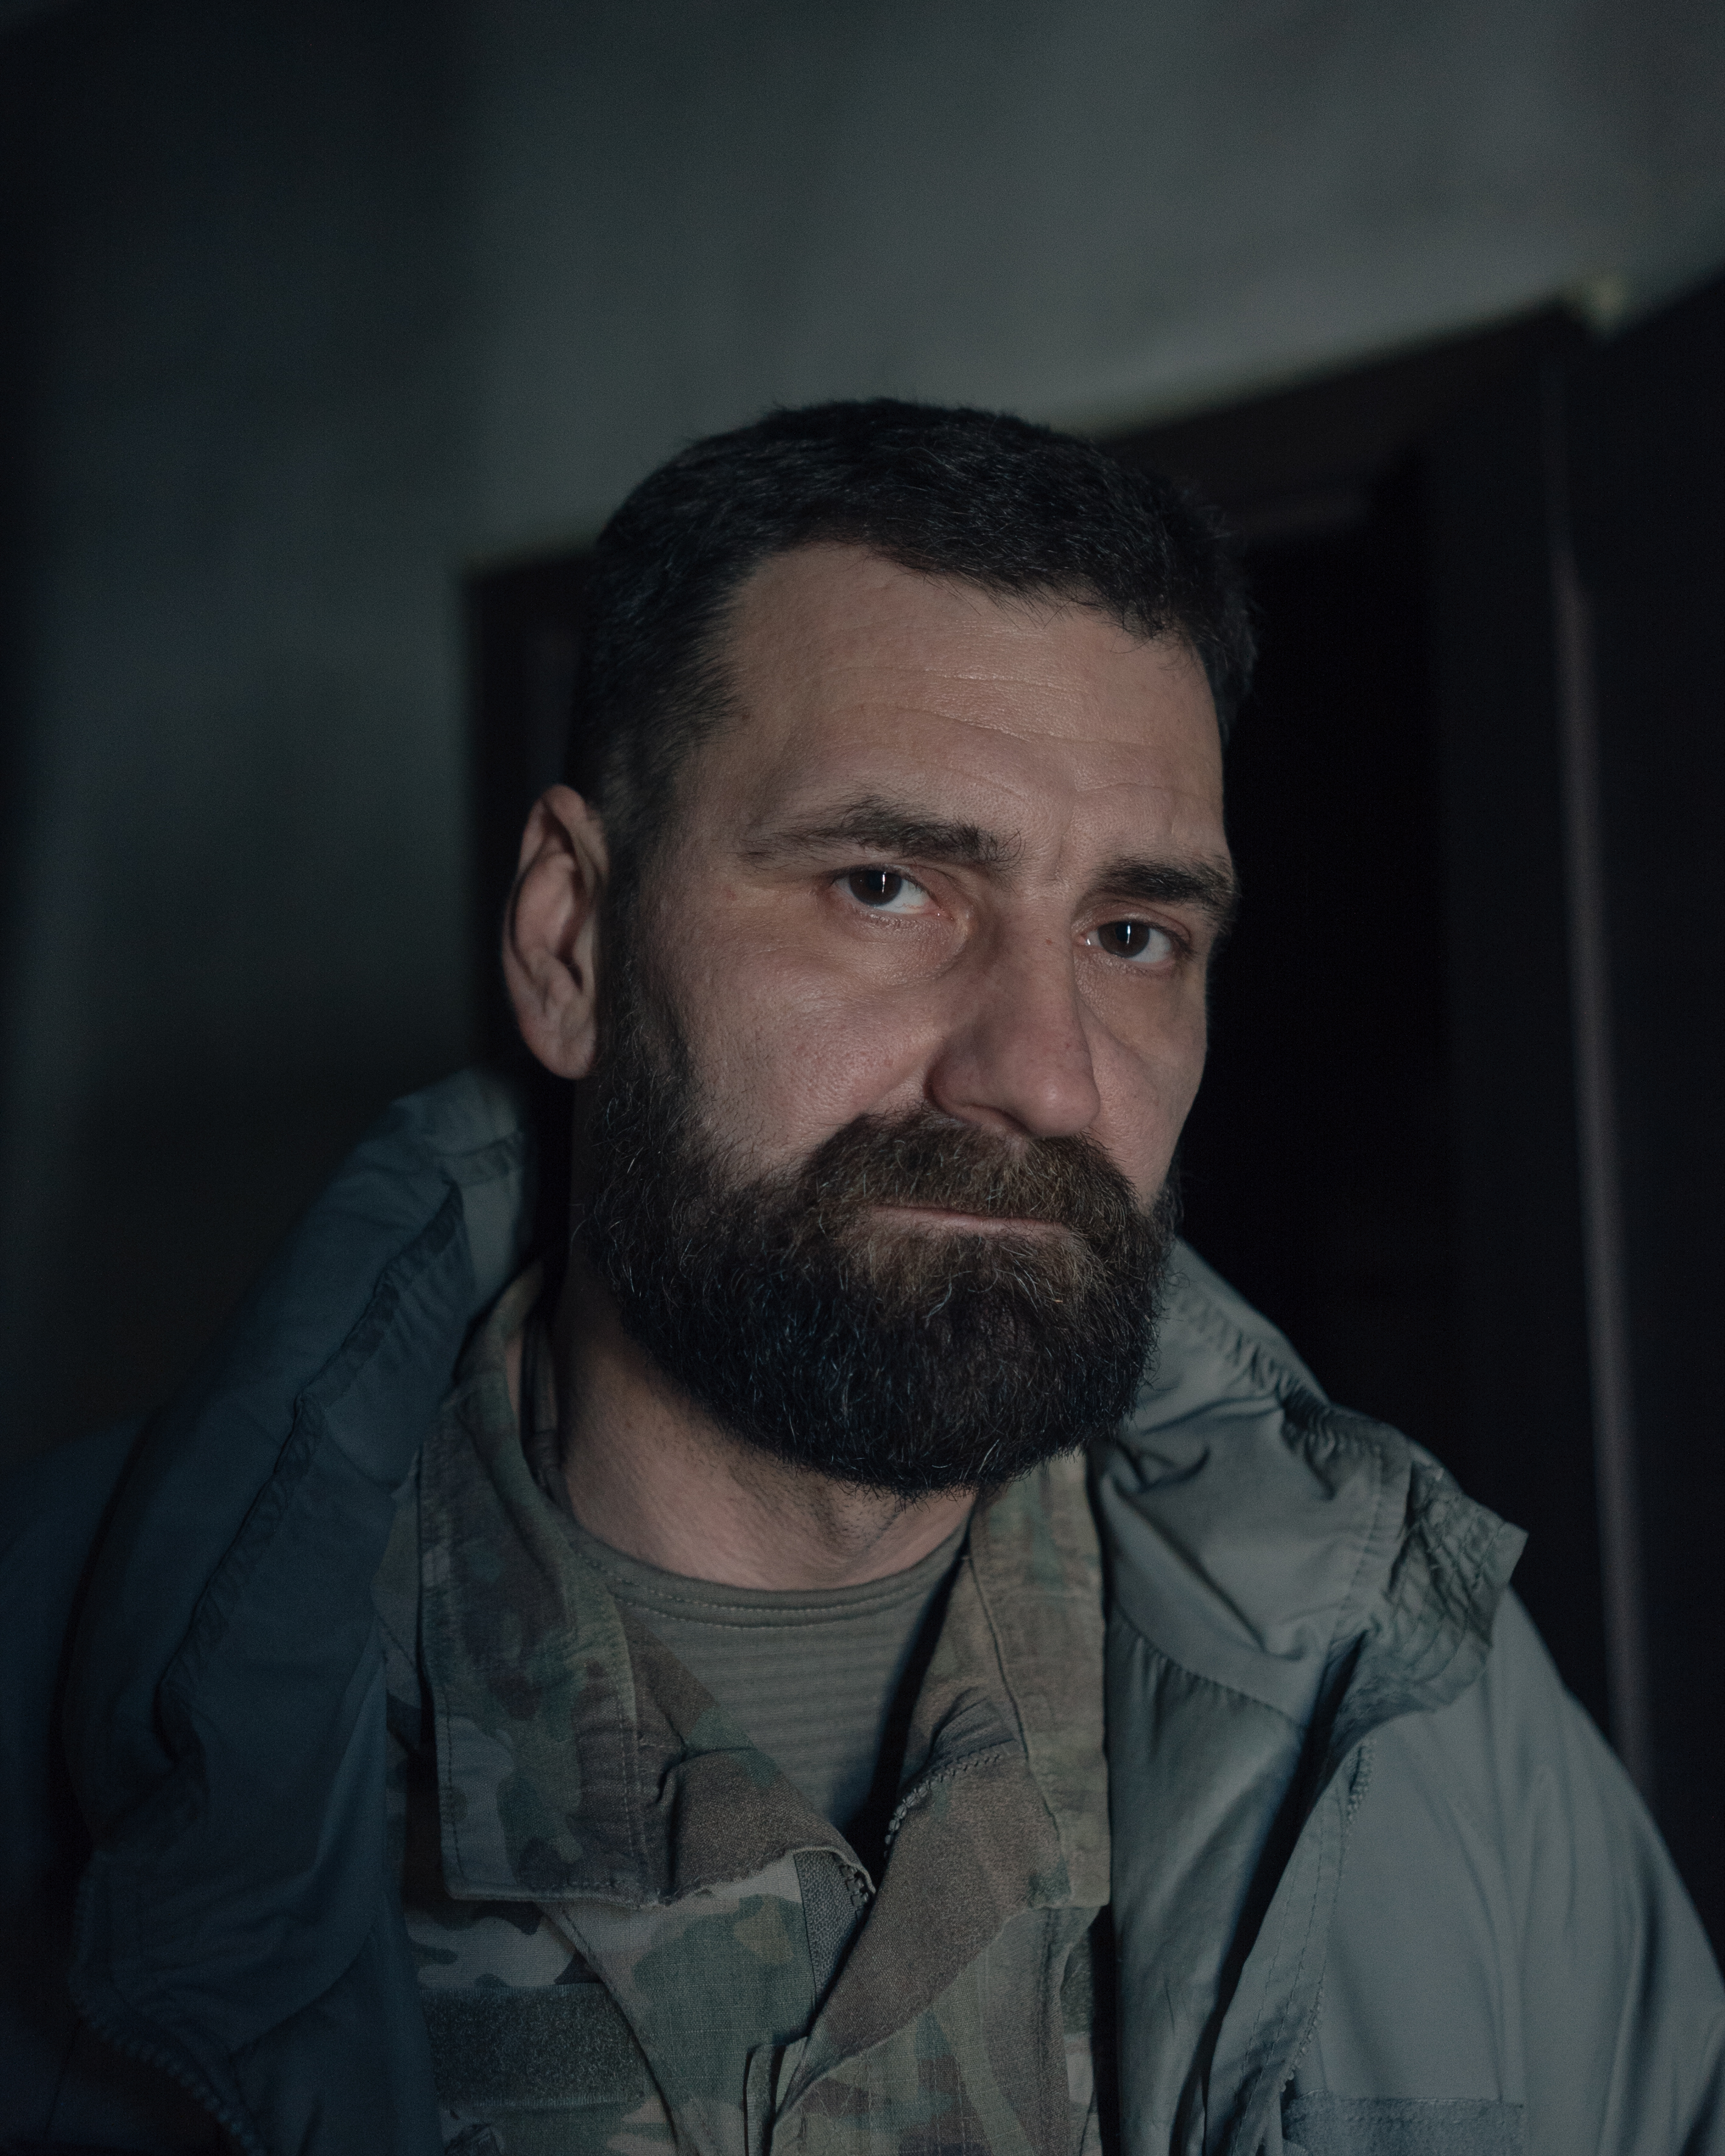 inside ukraine’s last stand in avdiivka and its ‘road of death’